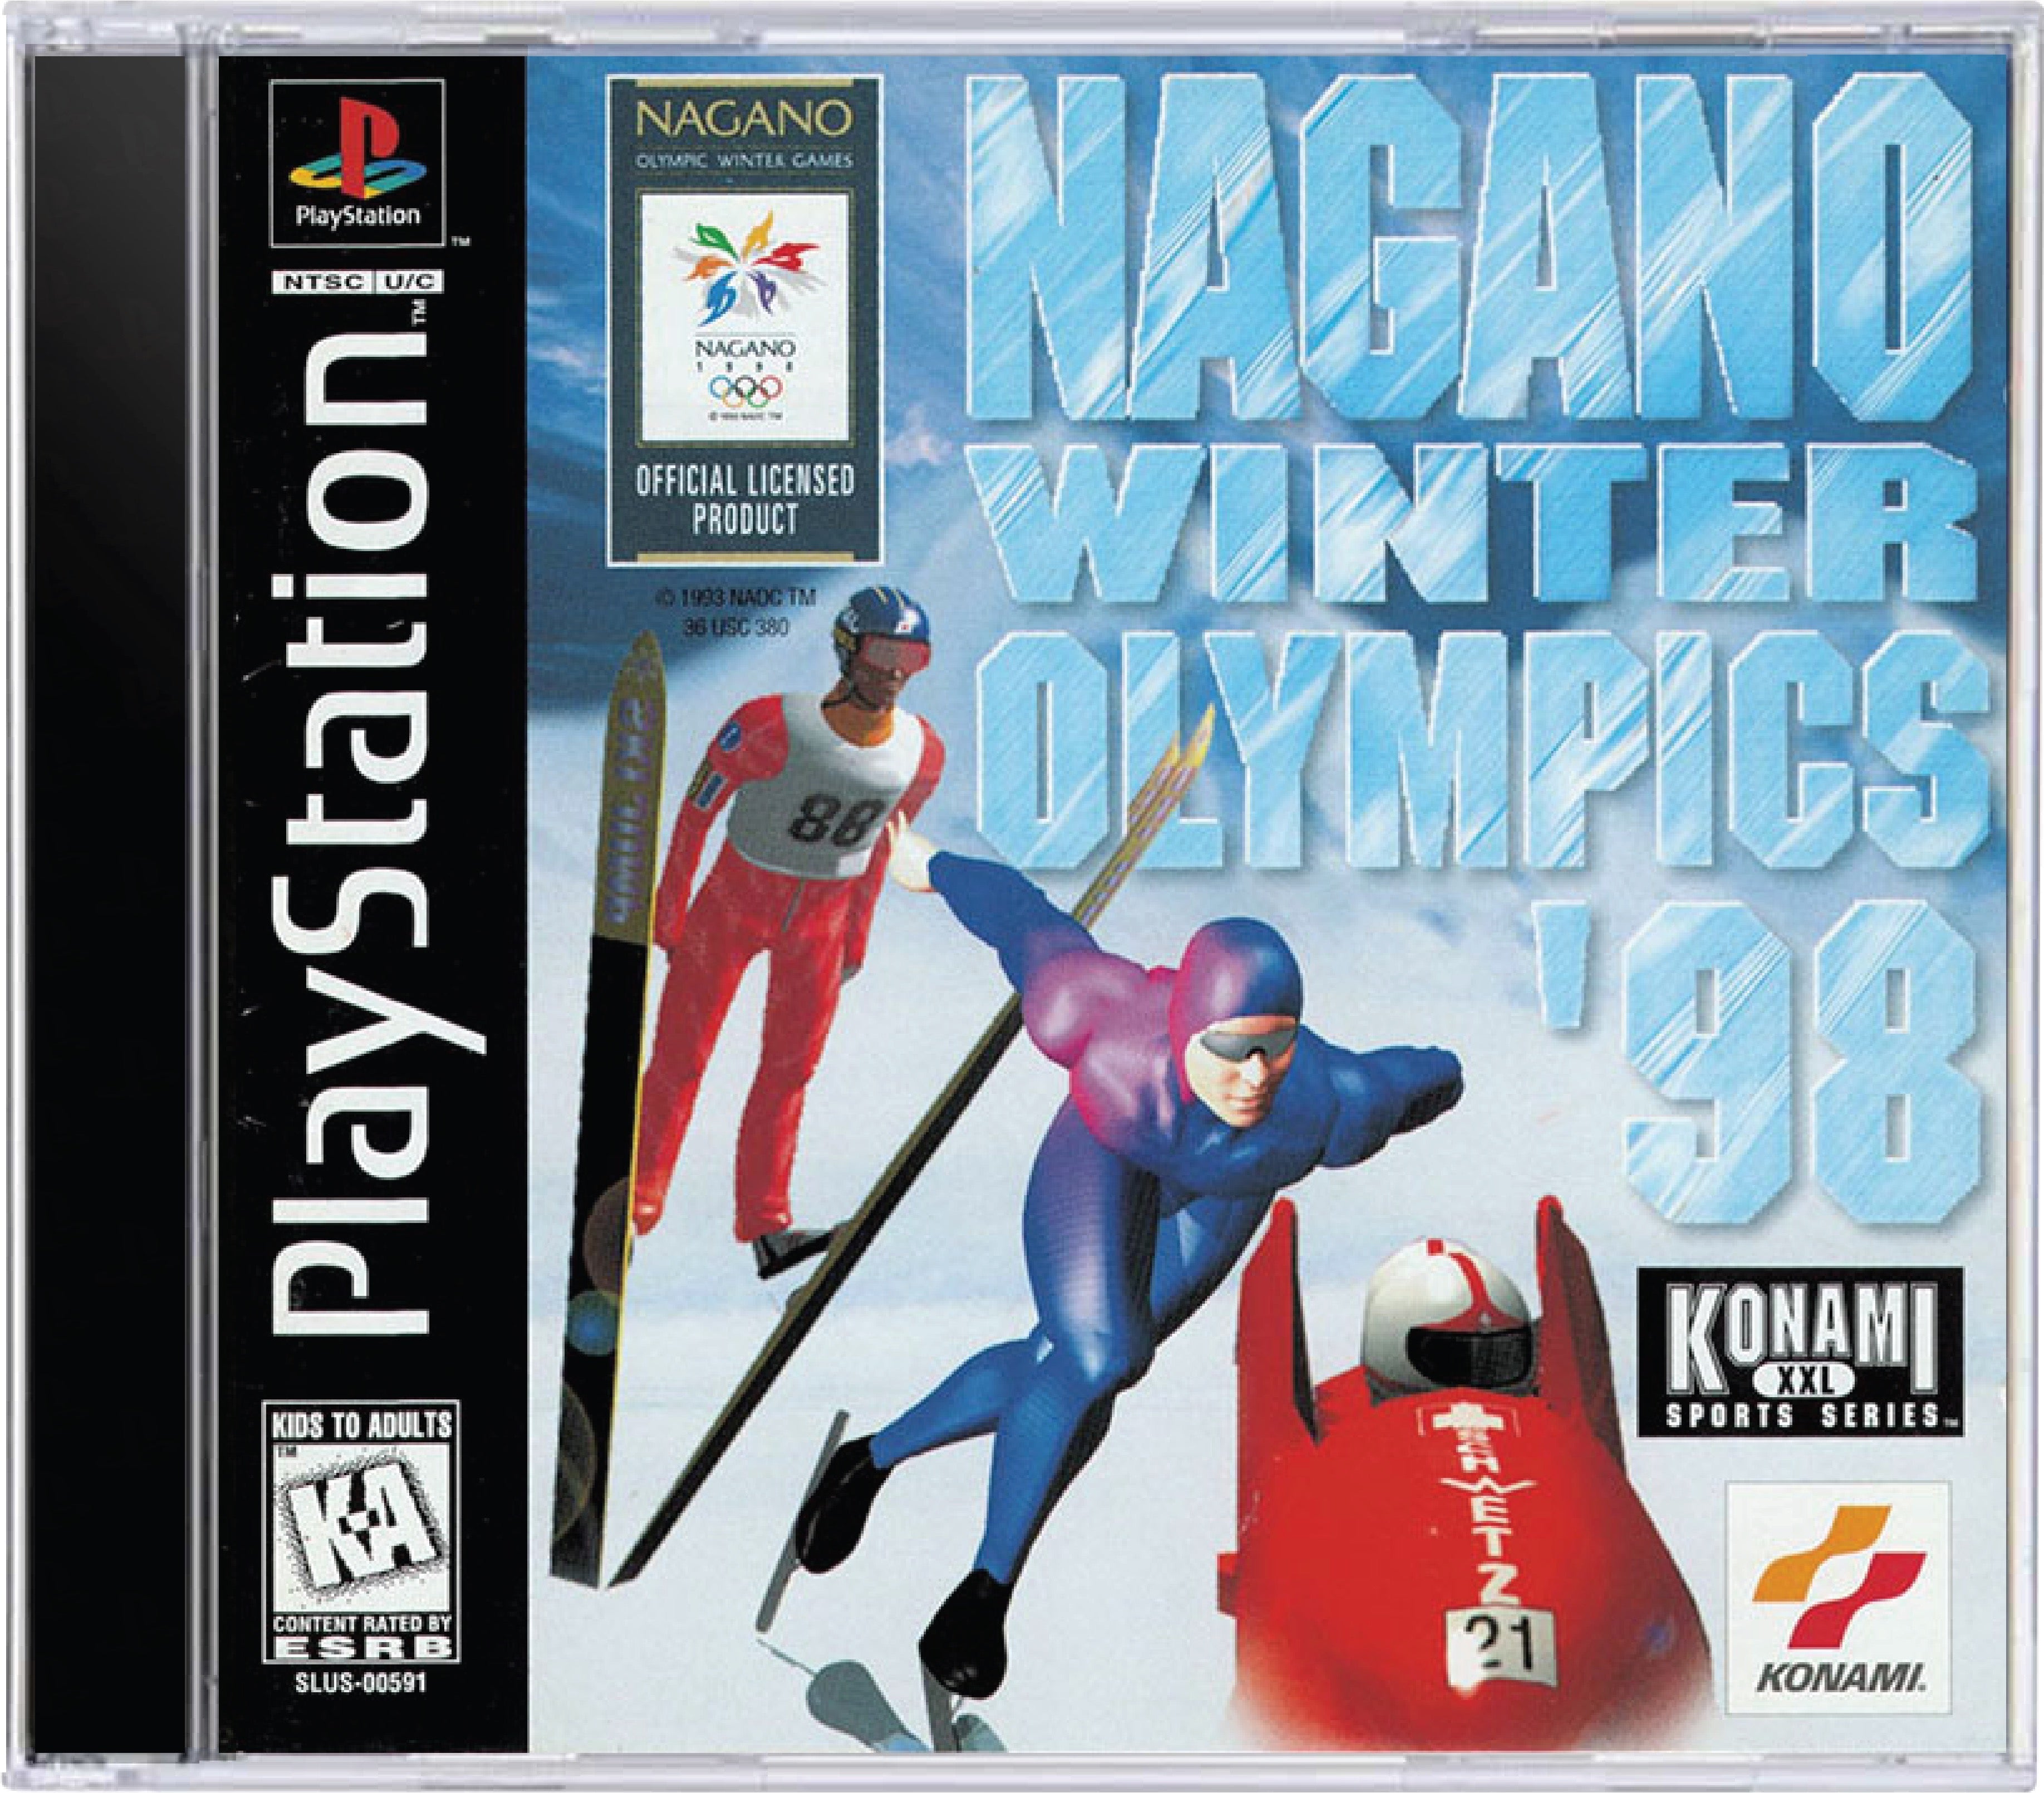 Nagano Winter Olympics 98 Cover Art and Product Photo